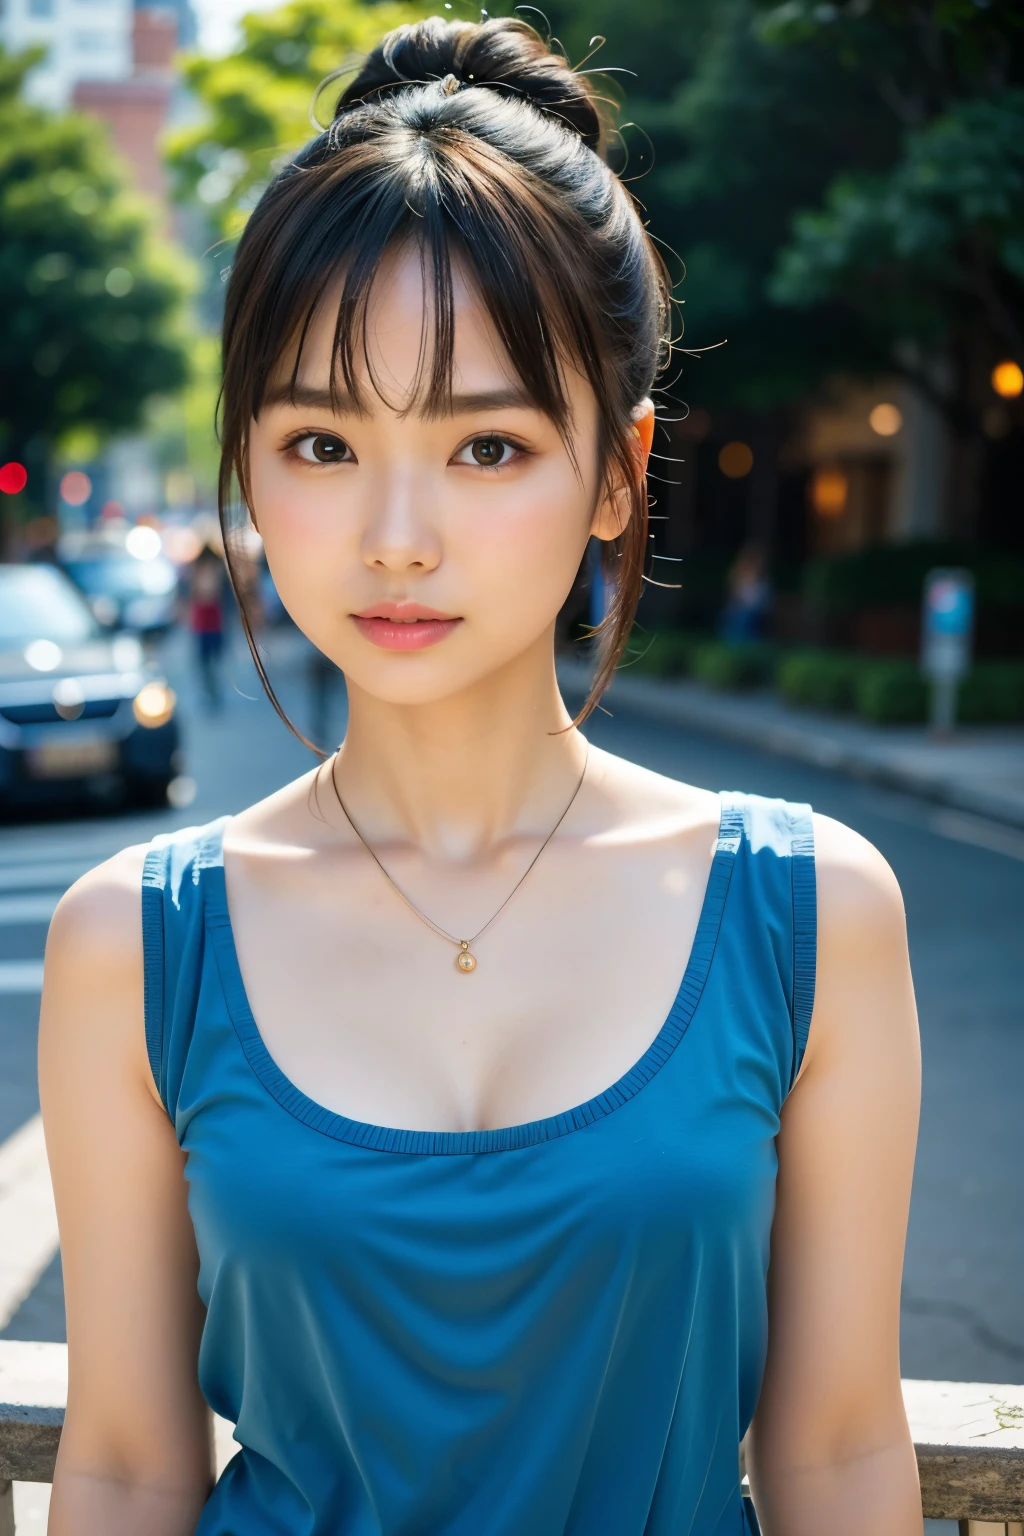 A beautiful Asian girl, with a bun skillfully assembled atop her head, adorned with a necklace that gracefully rested against her delicate collarbone, flashed a radiant smile towards the viewer. The gentle sunlight painted her features with a golden glow, while her attire consisted of tranquil blue clothes that further accentuated her ethereal beauty. The intricately detailed scene was captured in an 8K, top-quality, masterpiece, boasting lifelike vividness that was as captivating as the girl herself. With a serene expression and soft, shining skin, she stood in the foreground, the blurry cityscape serving as a tranquil backdrop to her rad